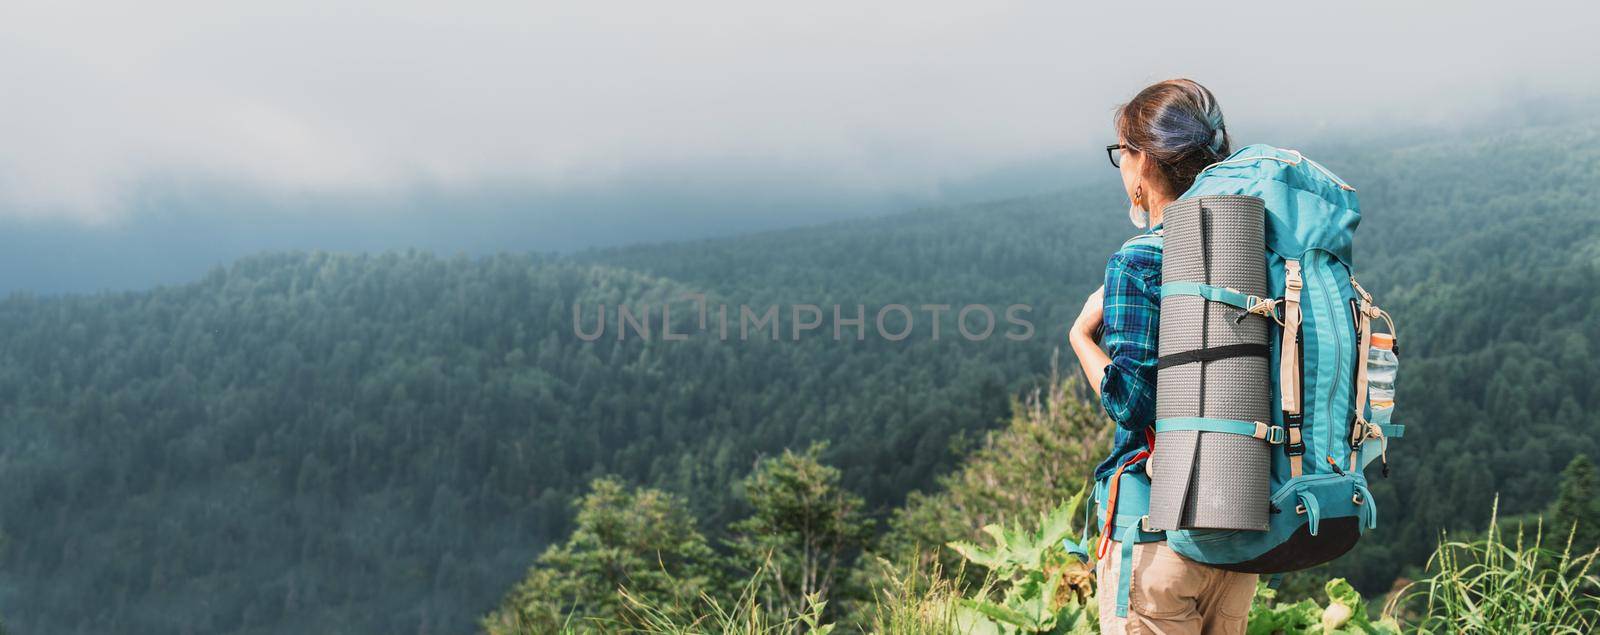 Explorer young woman with backpack looking at the mountains in summer